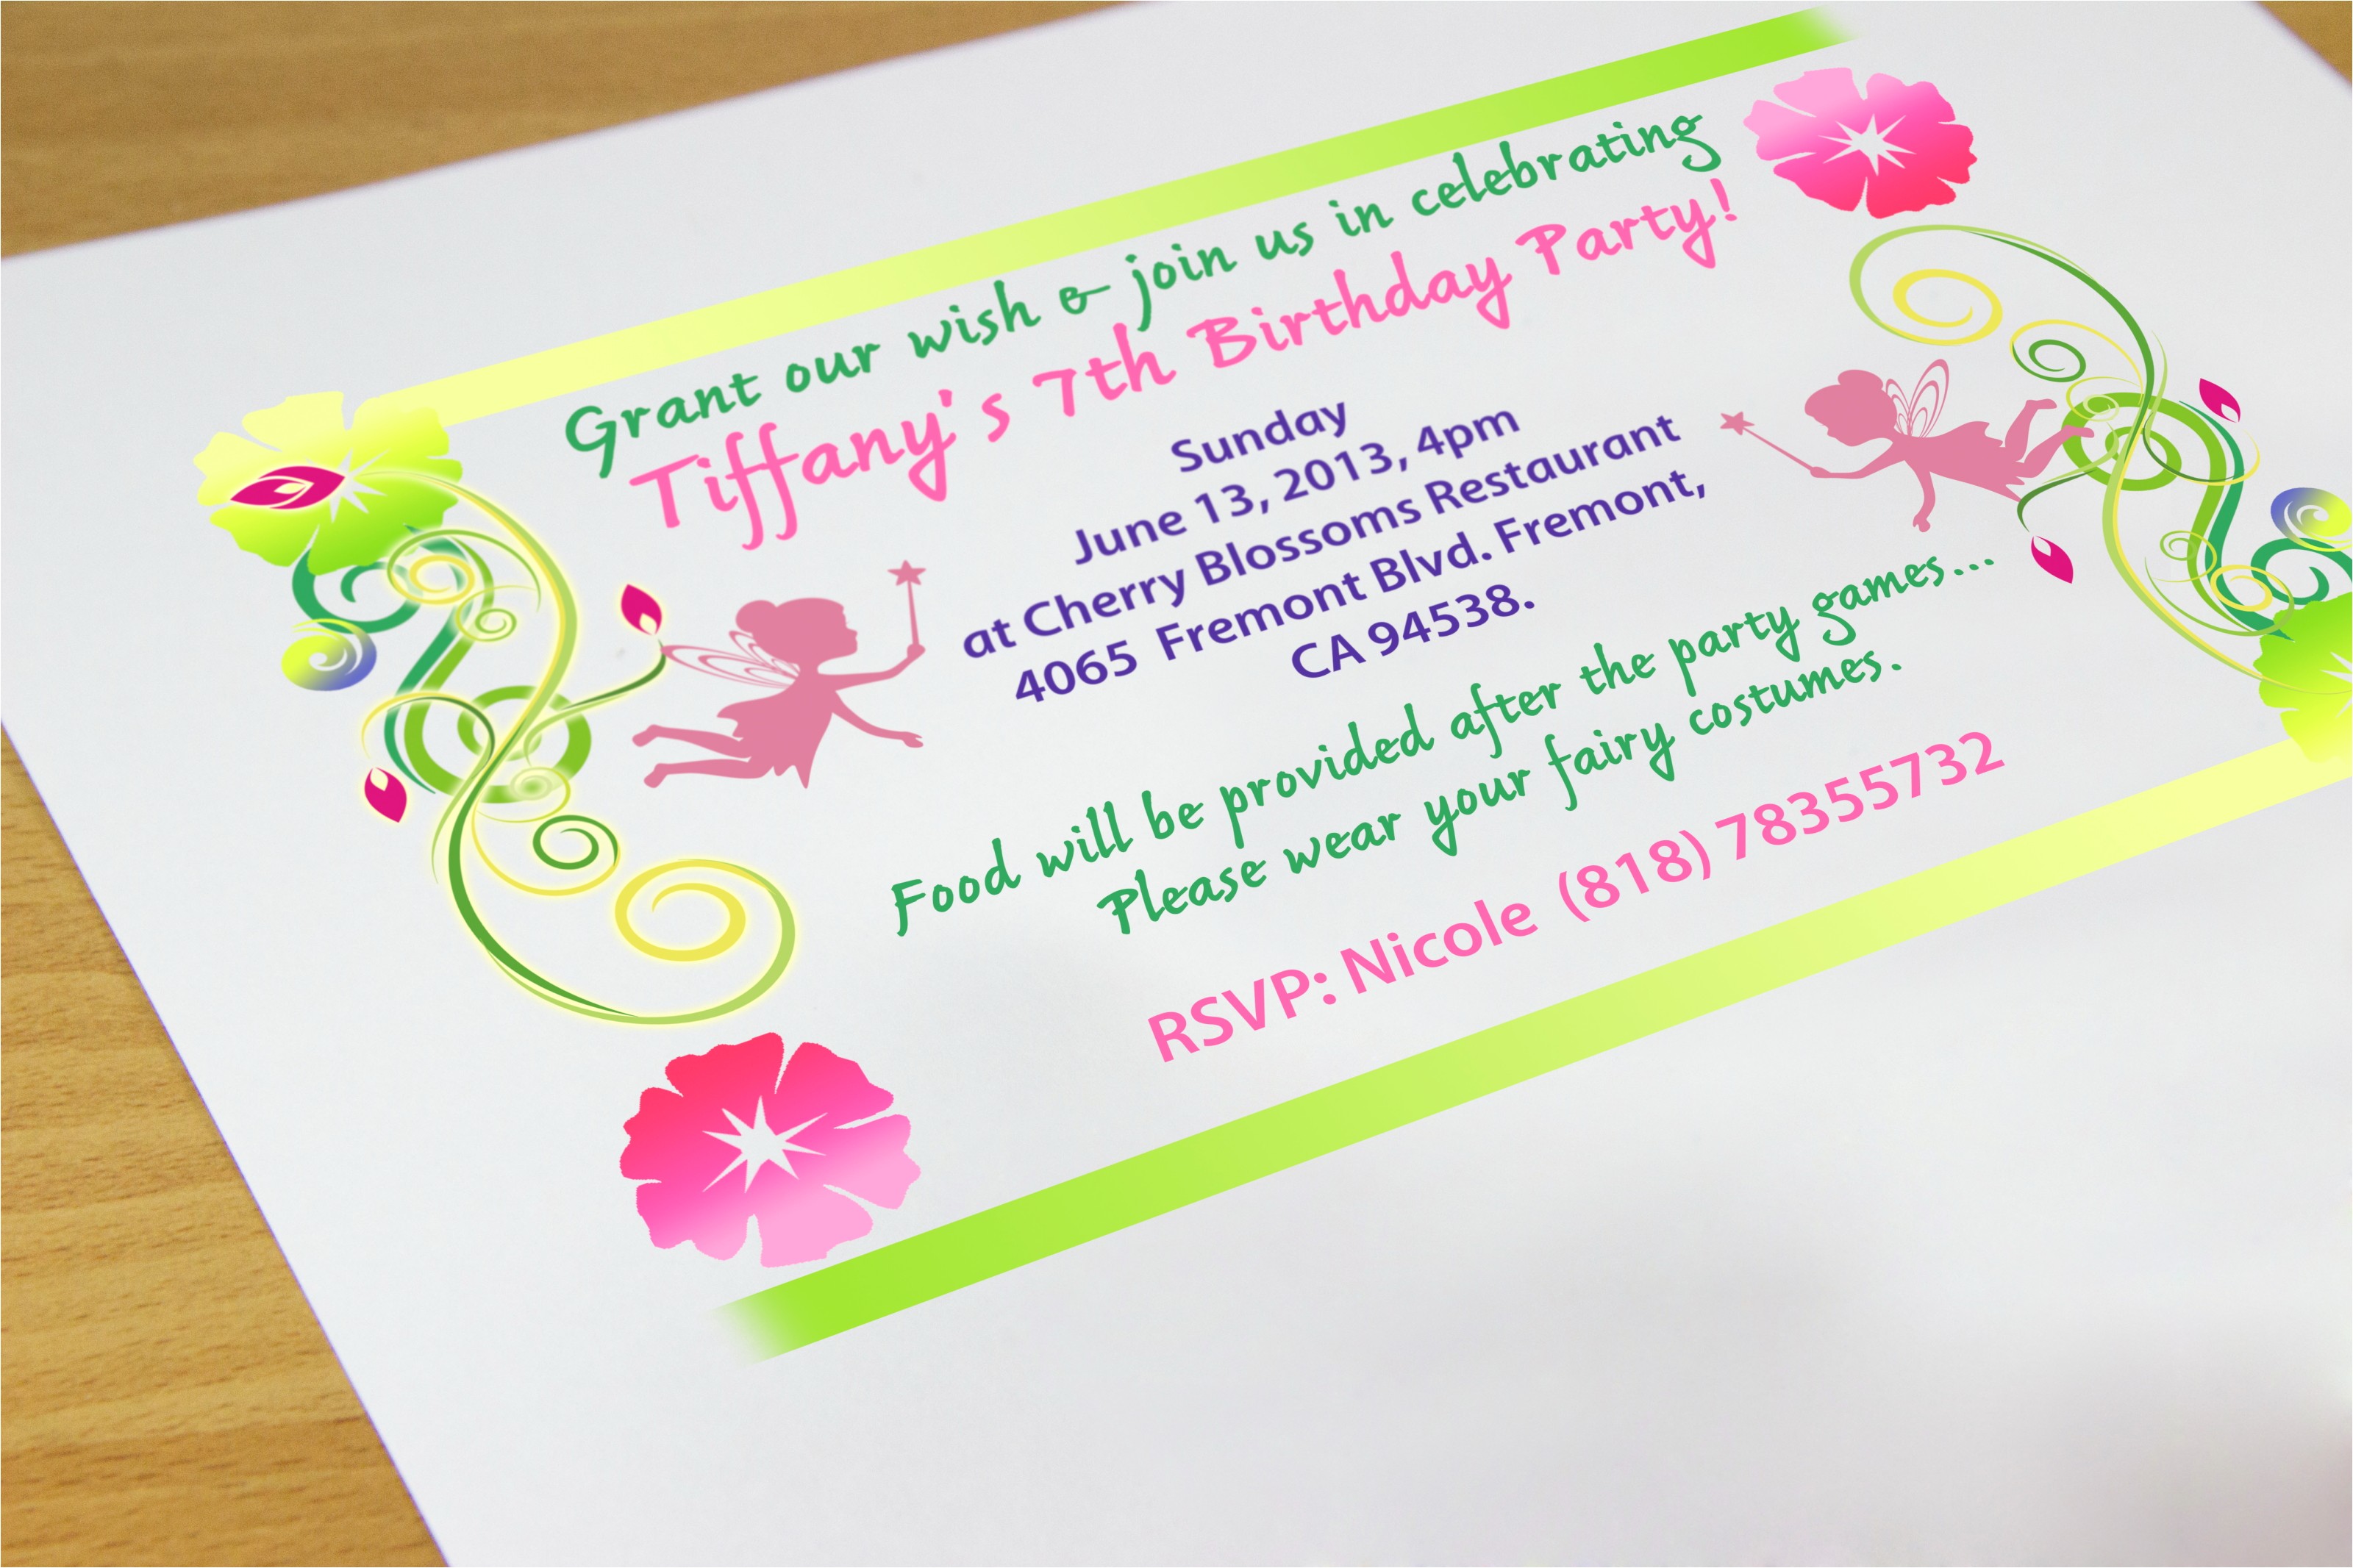 Make An Invitation Card for Your Birthday Party Creatively How to Make Party Invitations theruntime Com